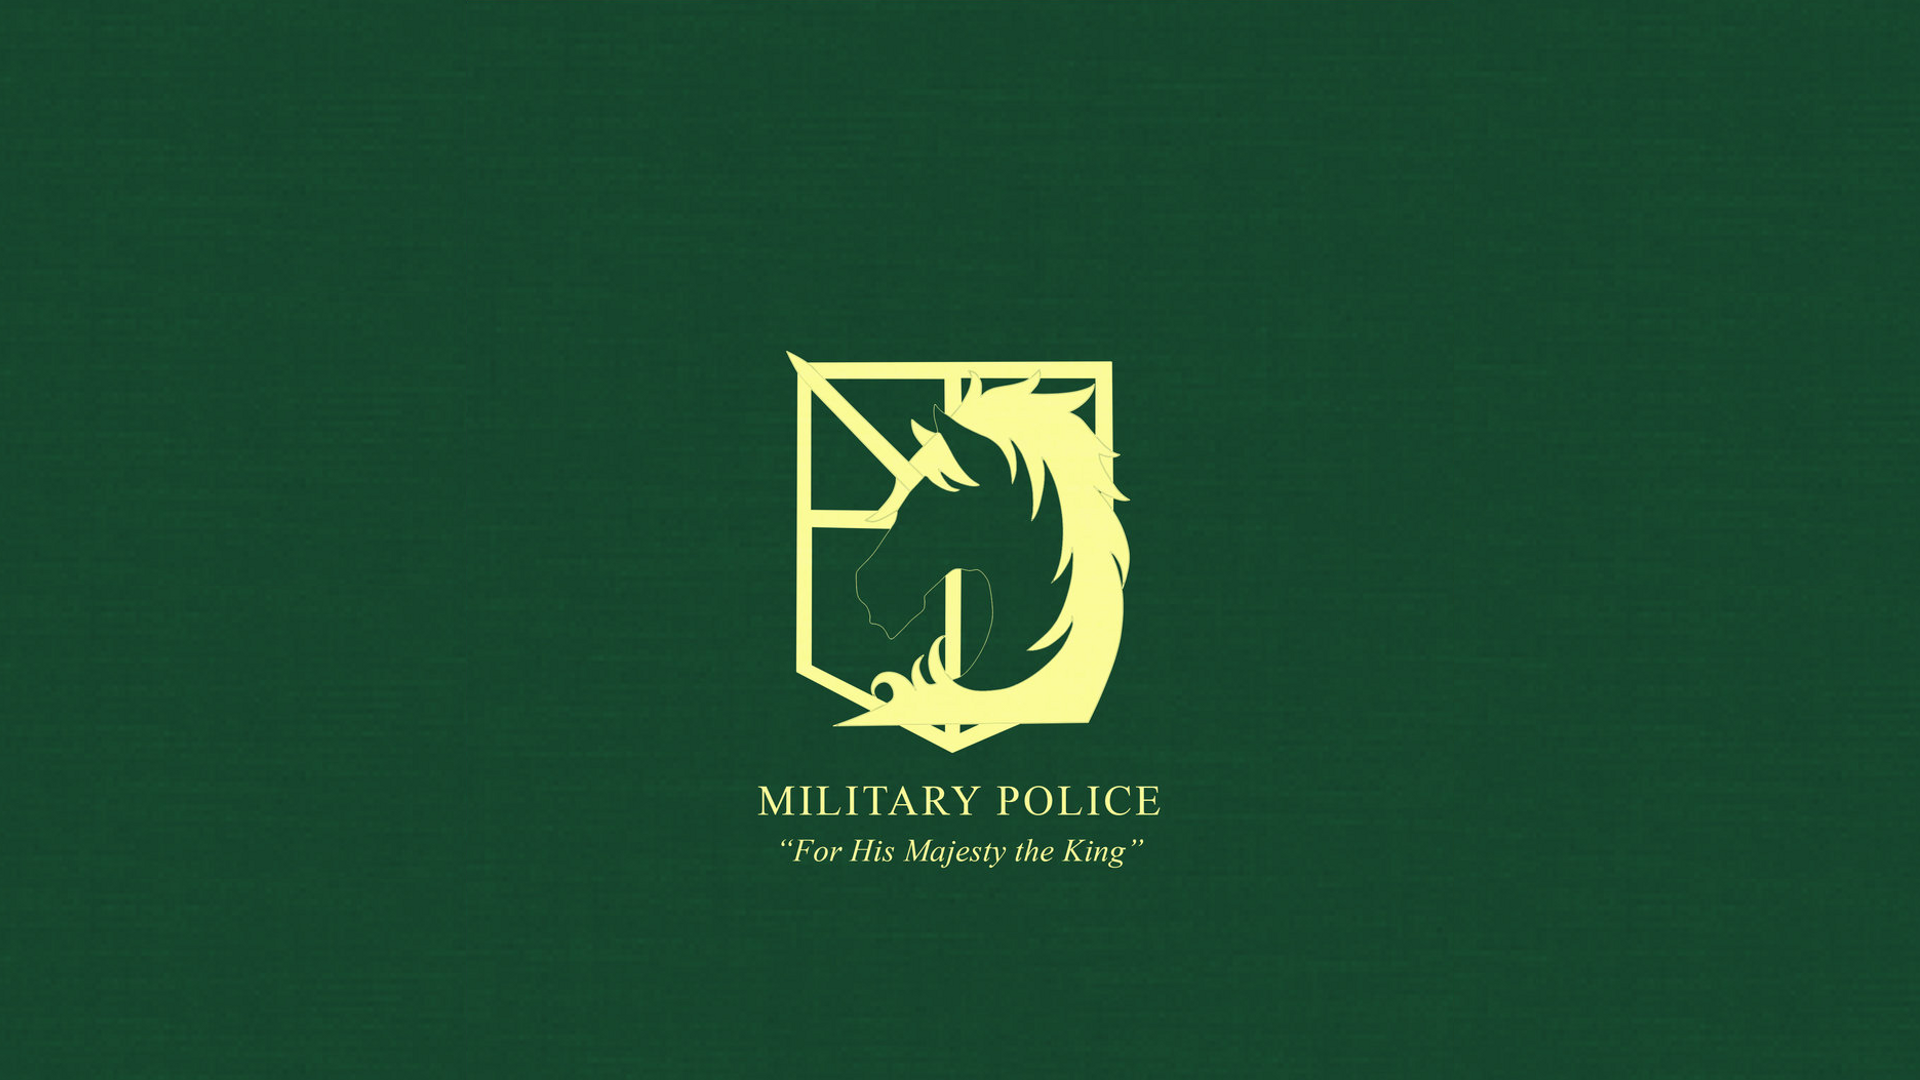 Attack on Titan Military Police Wallpaper by Imxset21 on